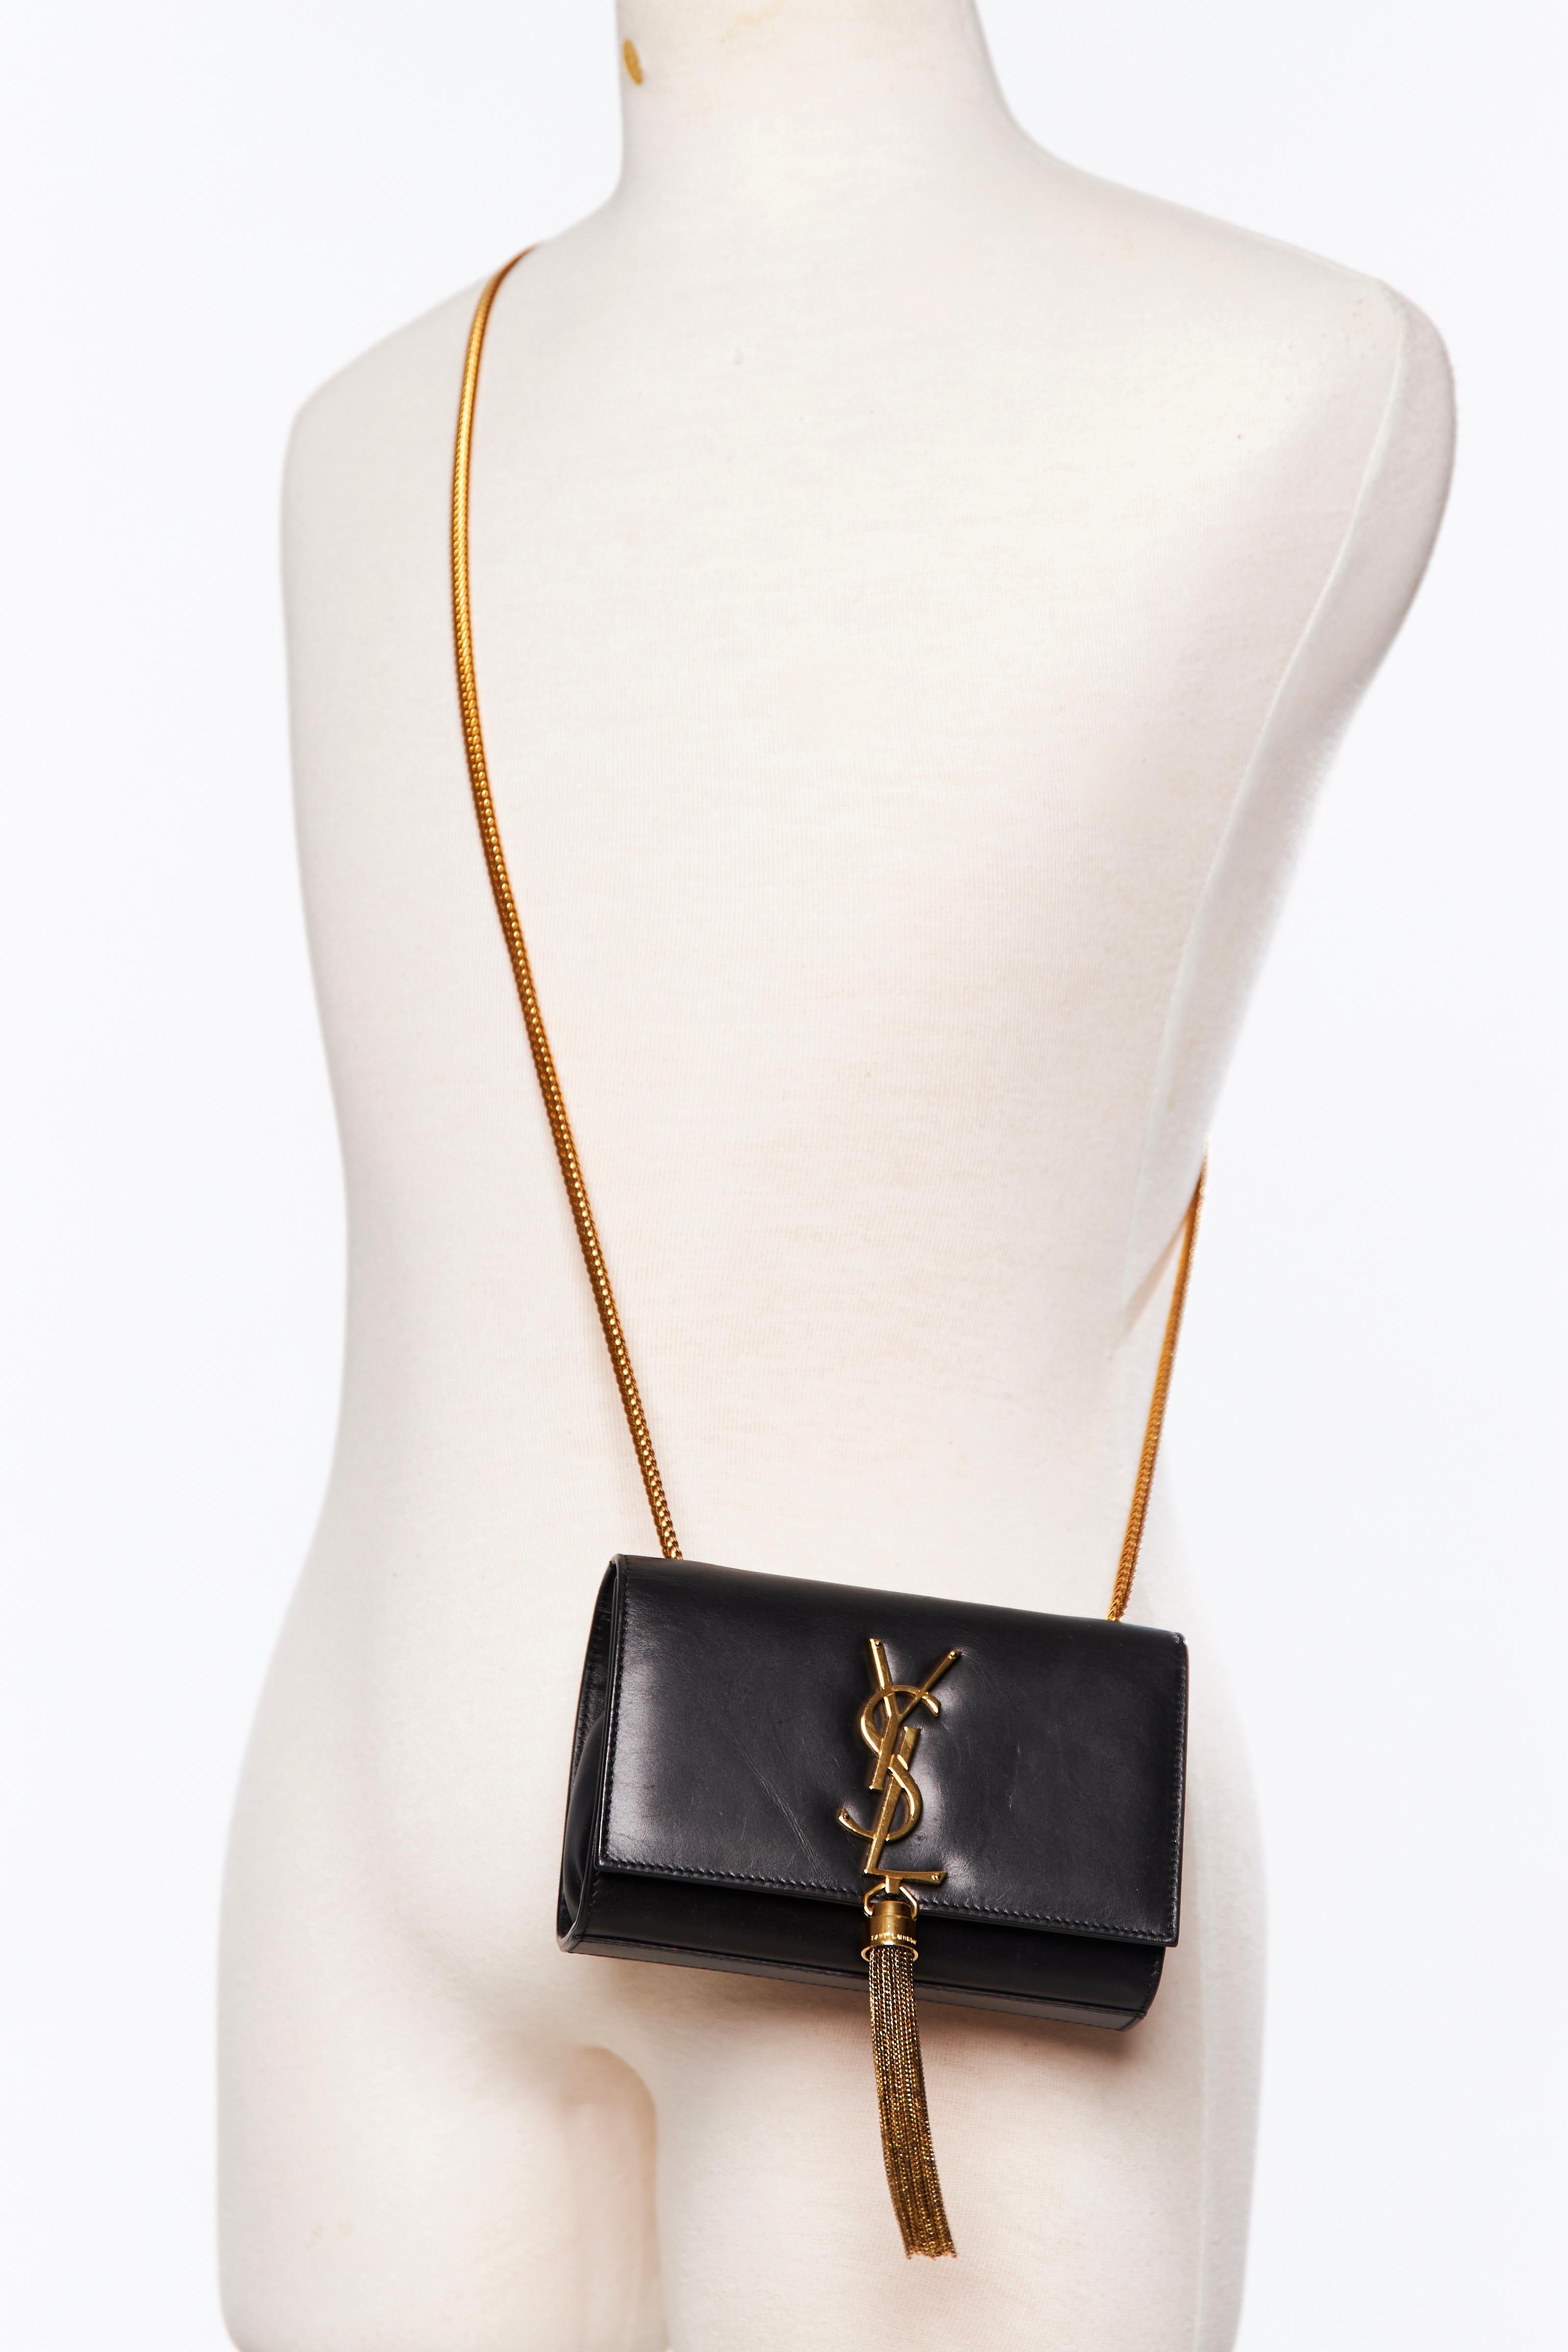 This shoulder bag is made of smooth calfskin leather in black. The bag features a gold chain link shoulder strap, a matching gold YSL logo, an accented chain link tassel, a crossover flap, magnetic snap closure and a black suede interior with a